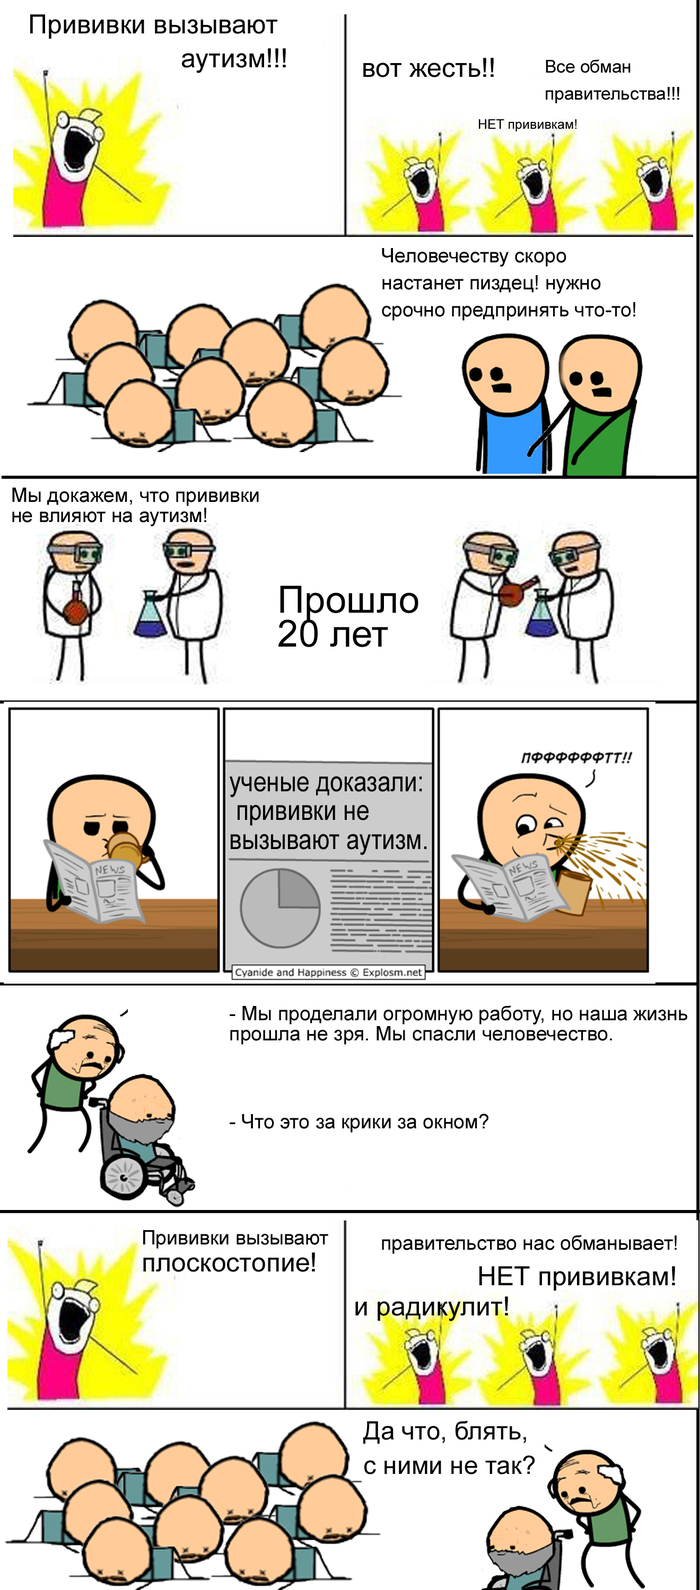  , , Cyanide and Happiness, , 